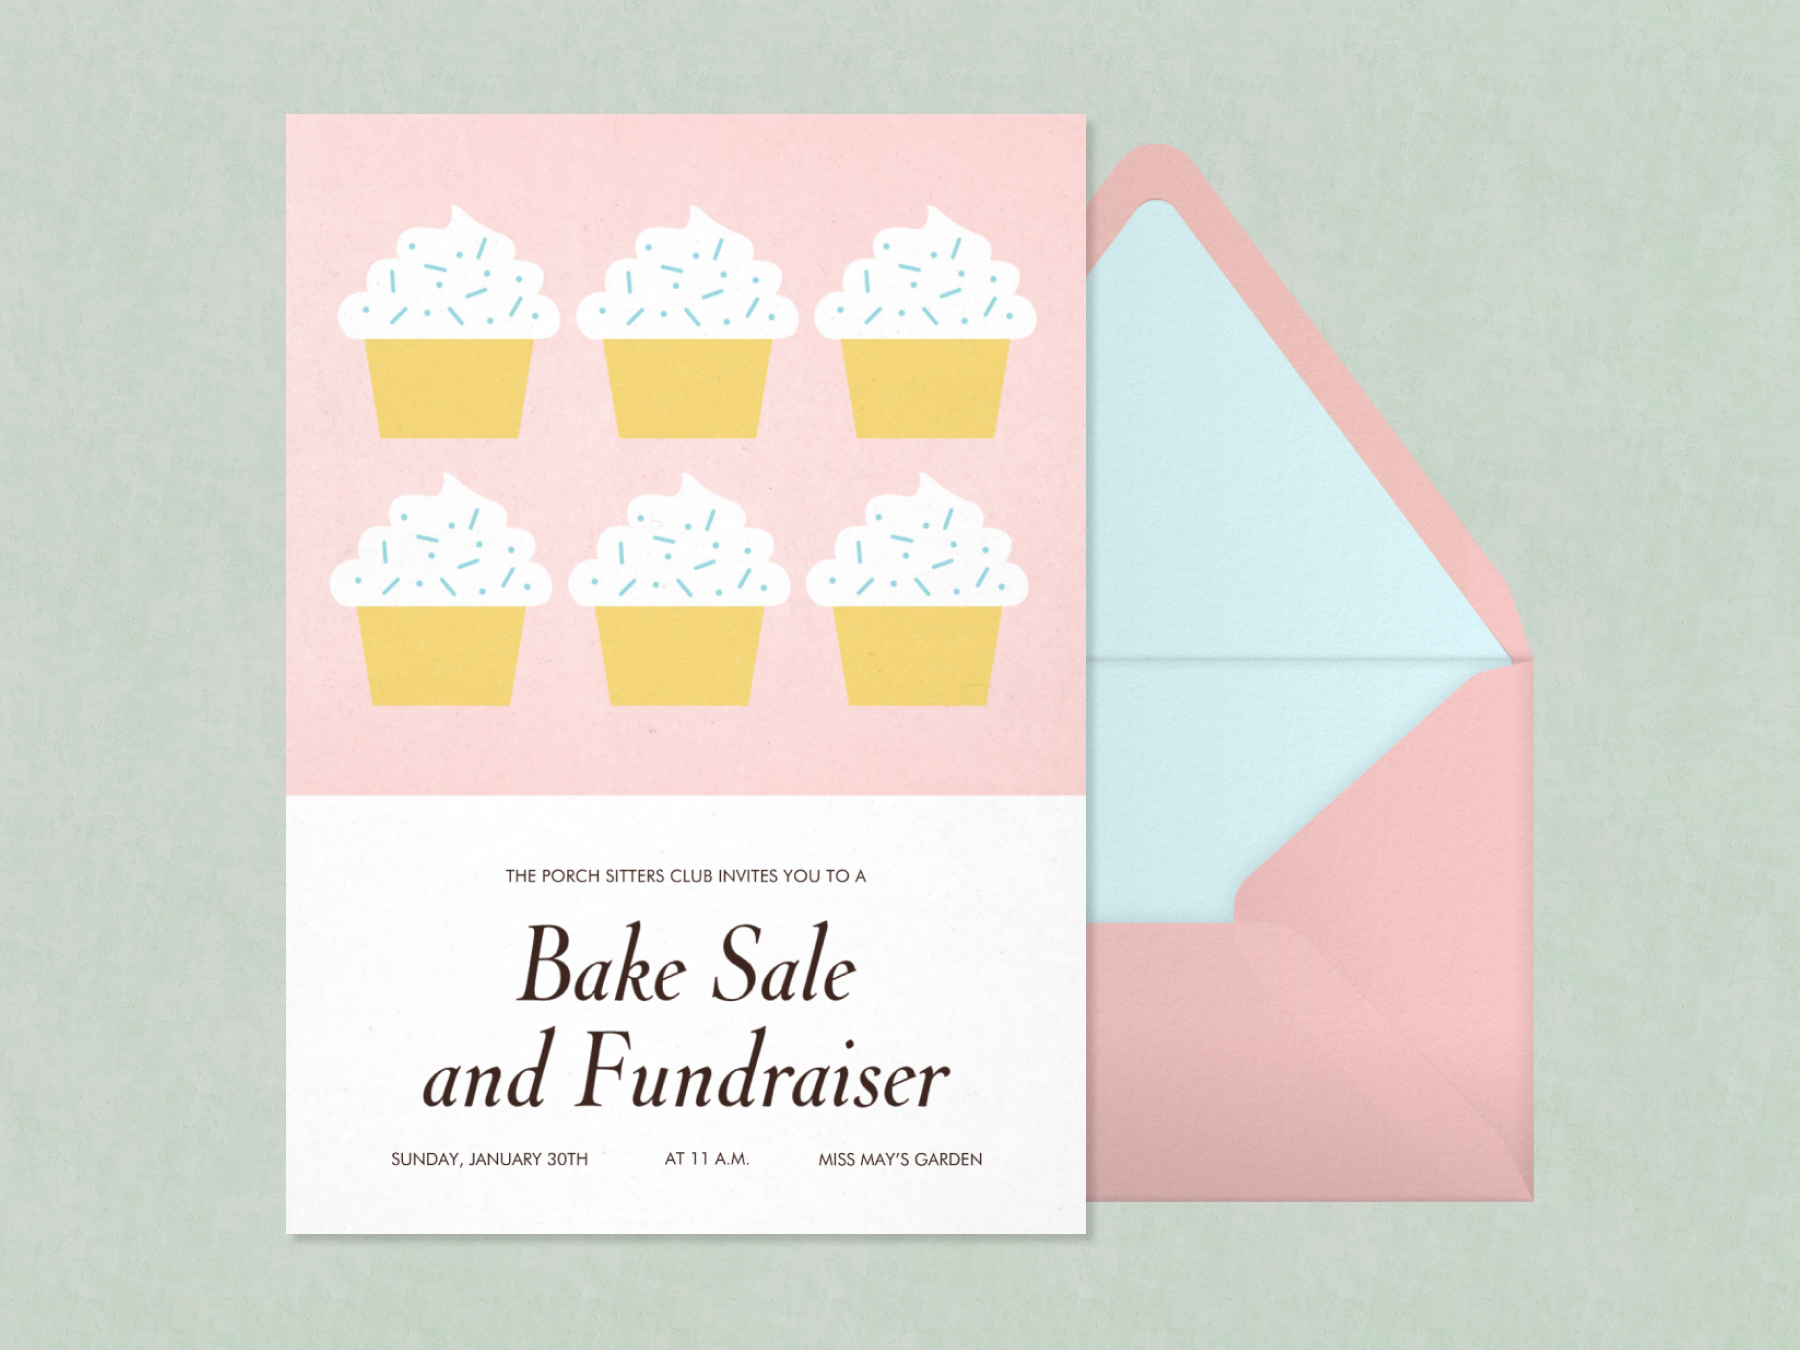 A pink bake sale and fundraiser invitation with a simplified illustration of six cupcakes with a watching pink envelope.